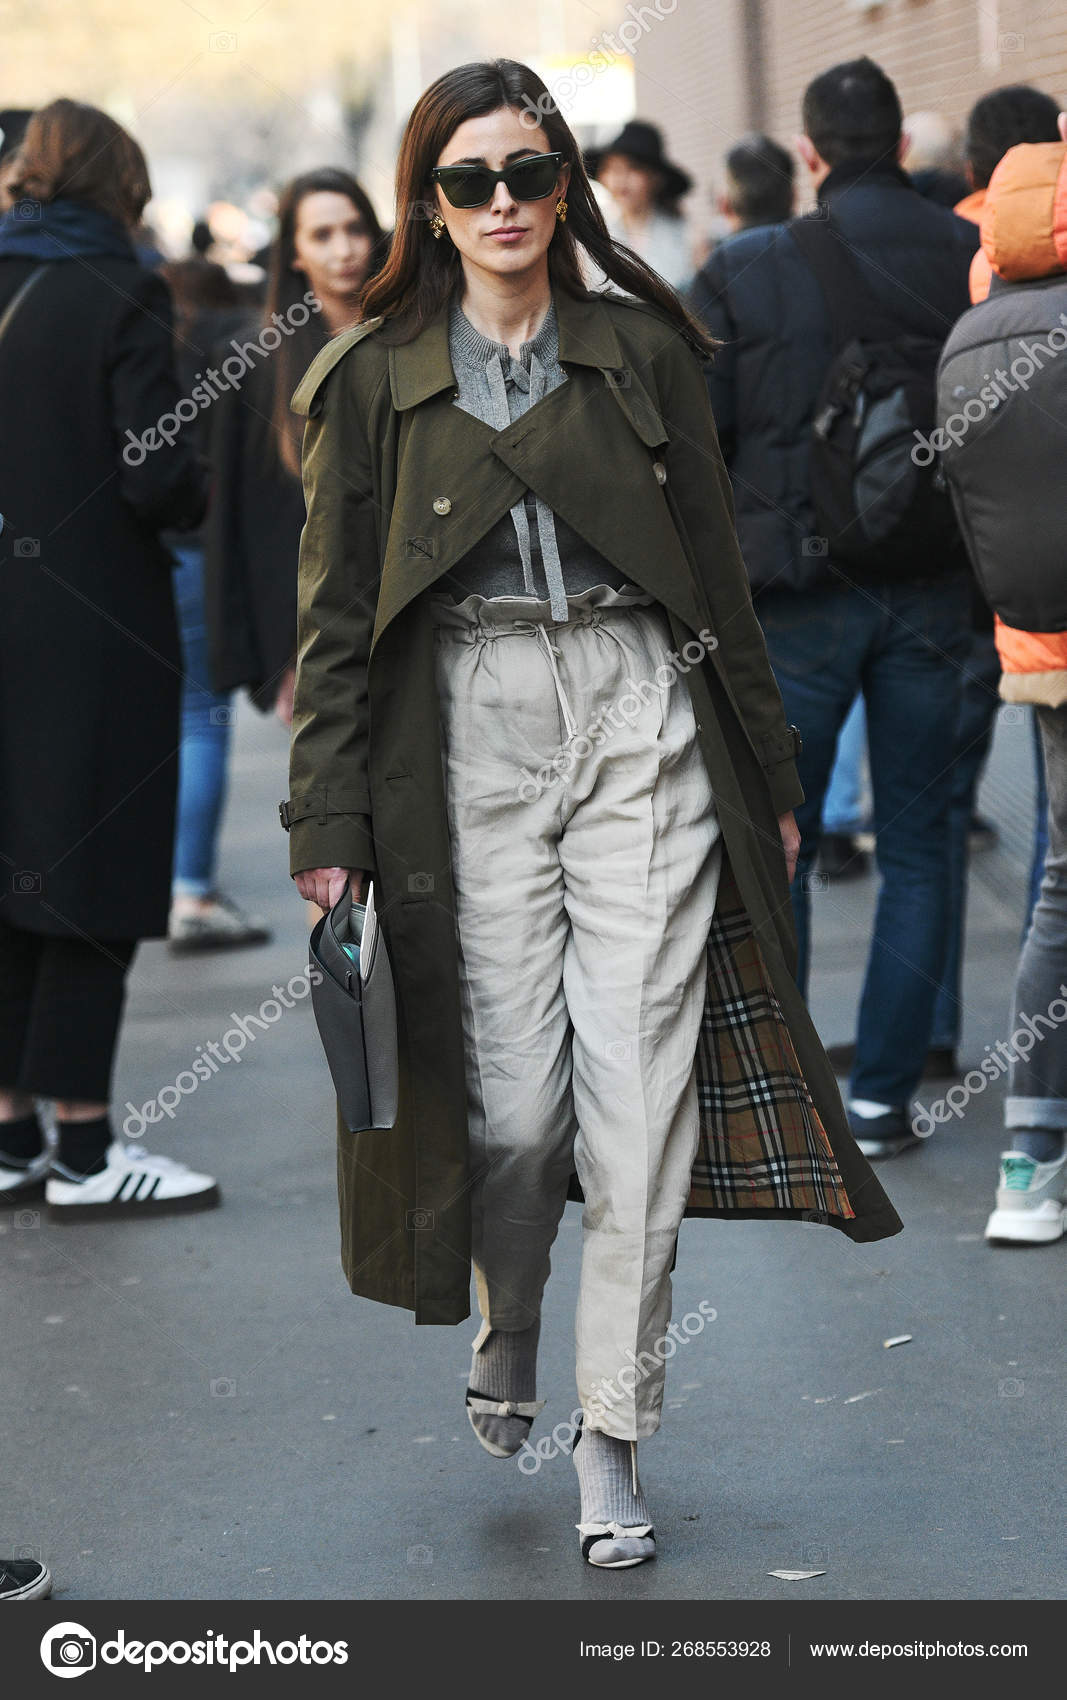 burberry trench styles